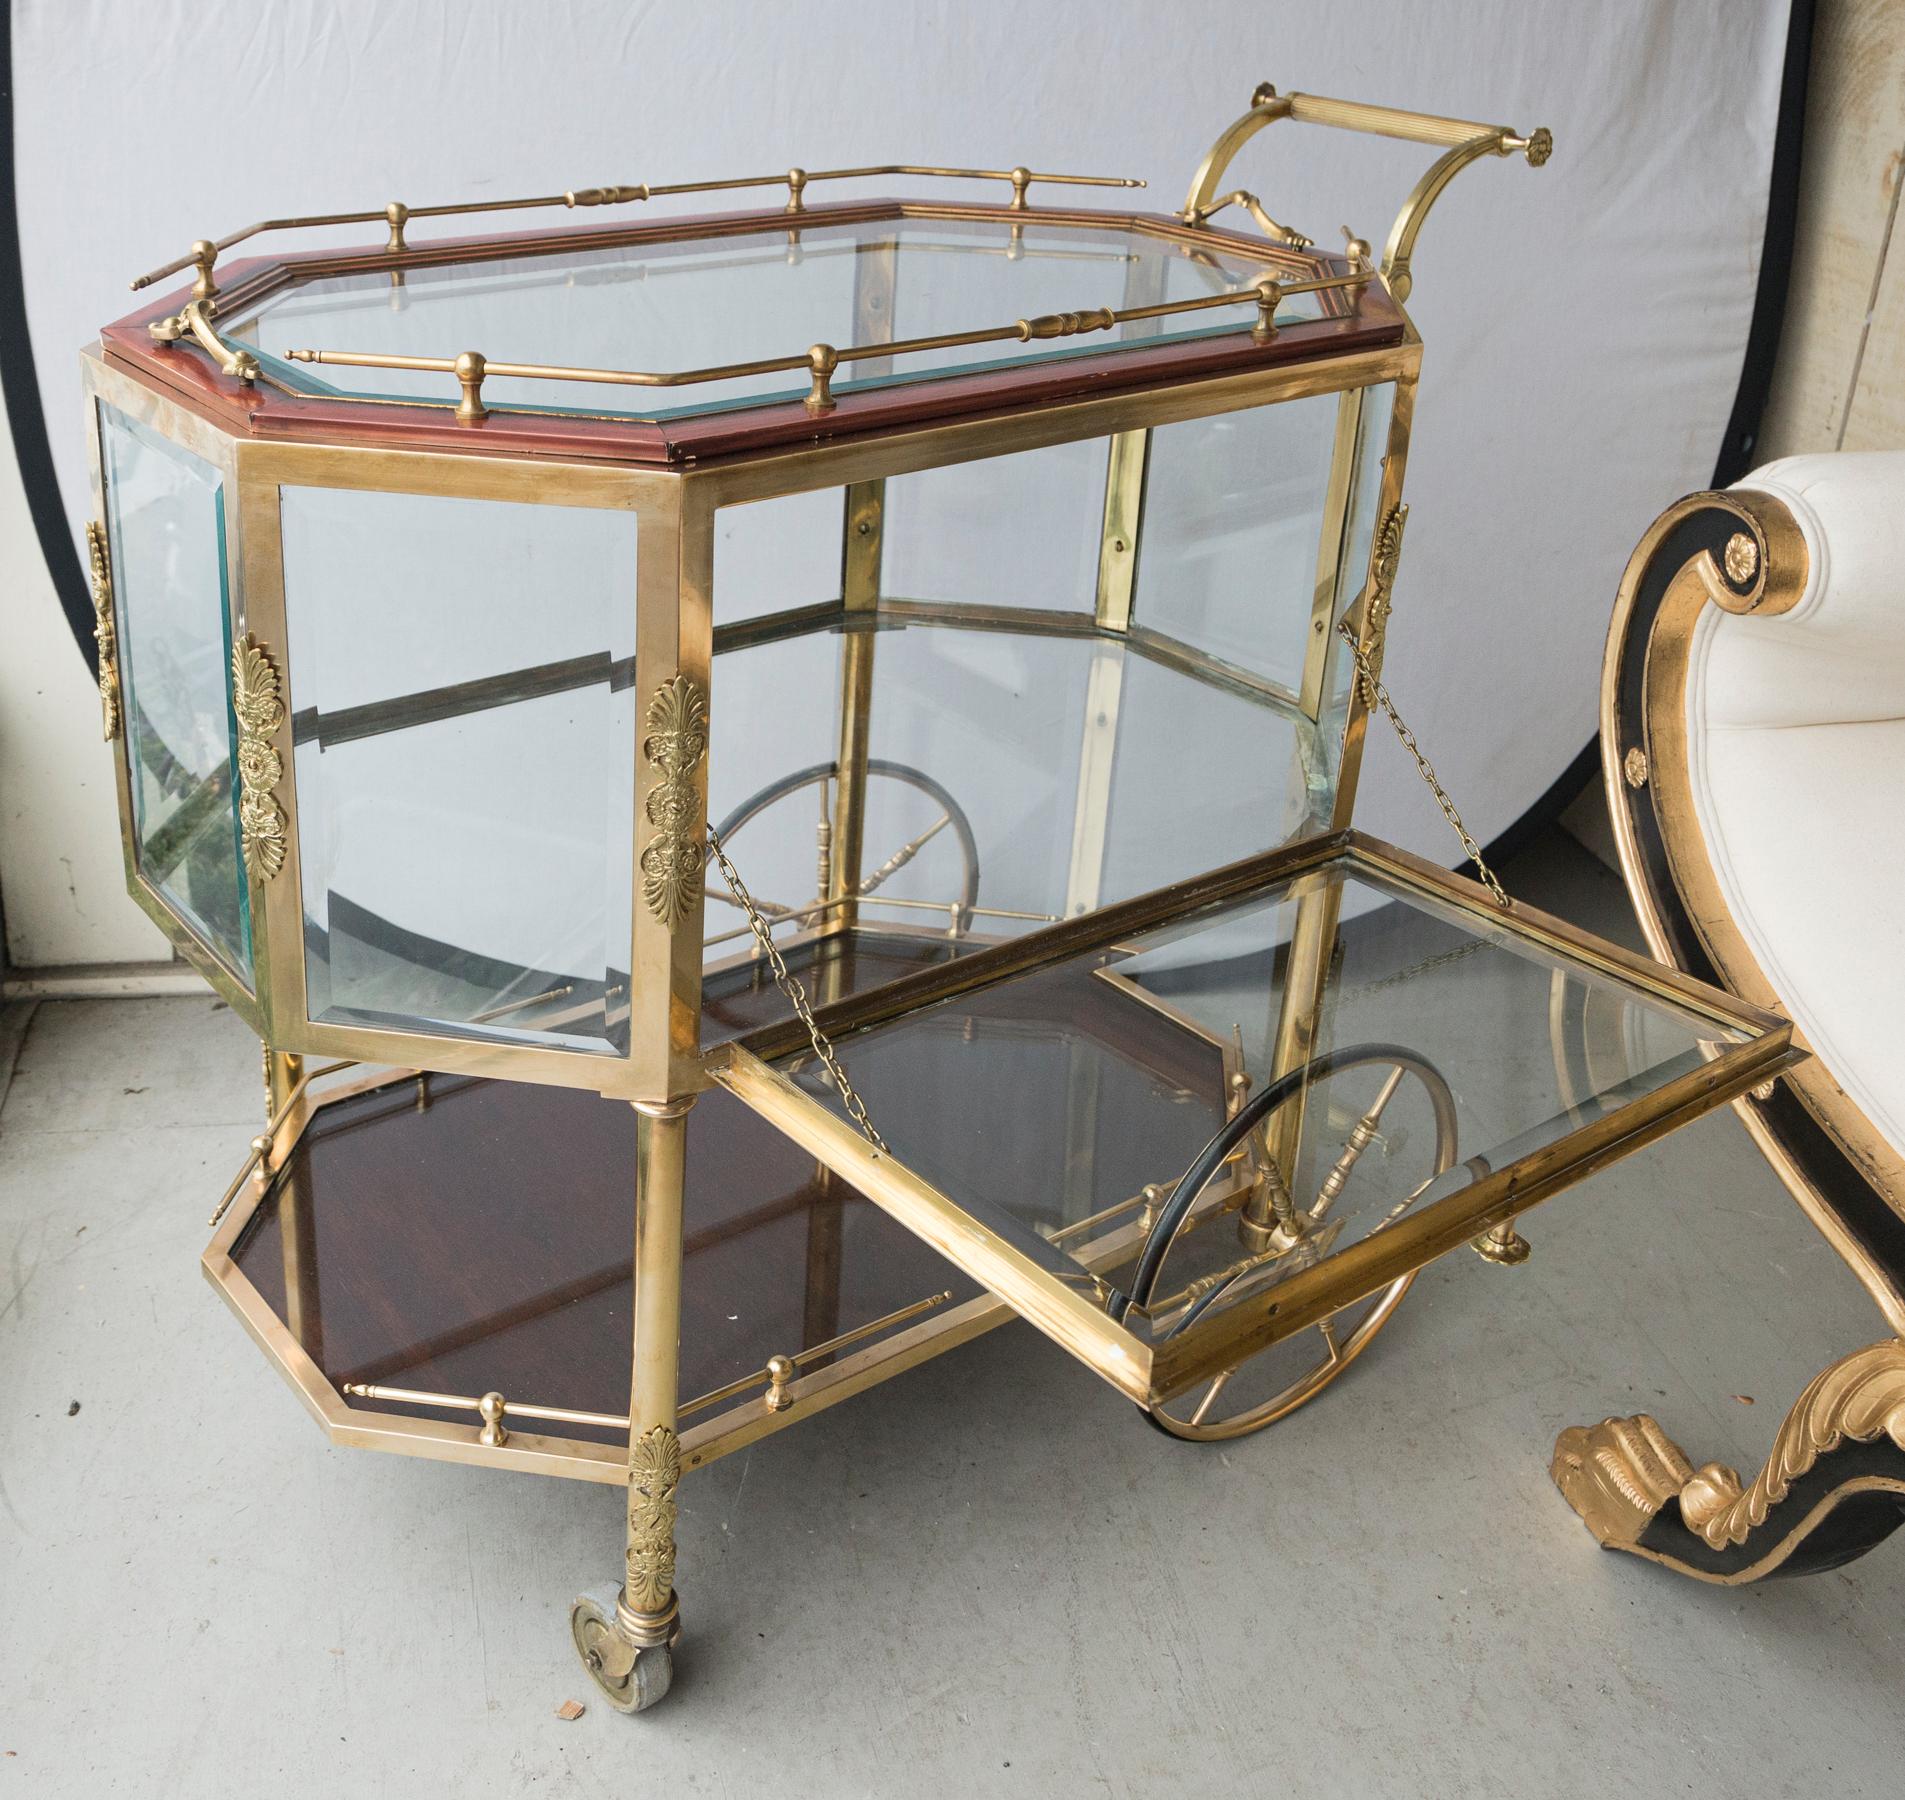 The top of the cart is a lift off glass and painted wood frame tray. There are brass handles at either end and a brass low gallery or fence, on all sides,
The middle section is a drop front door cabinet. The door is attached with chains. It snaps